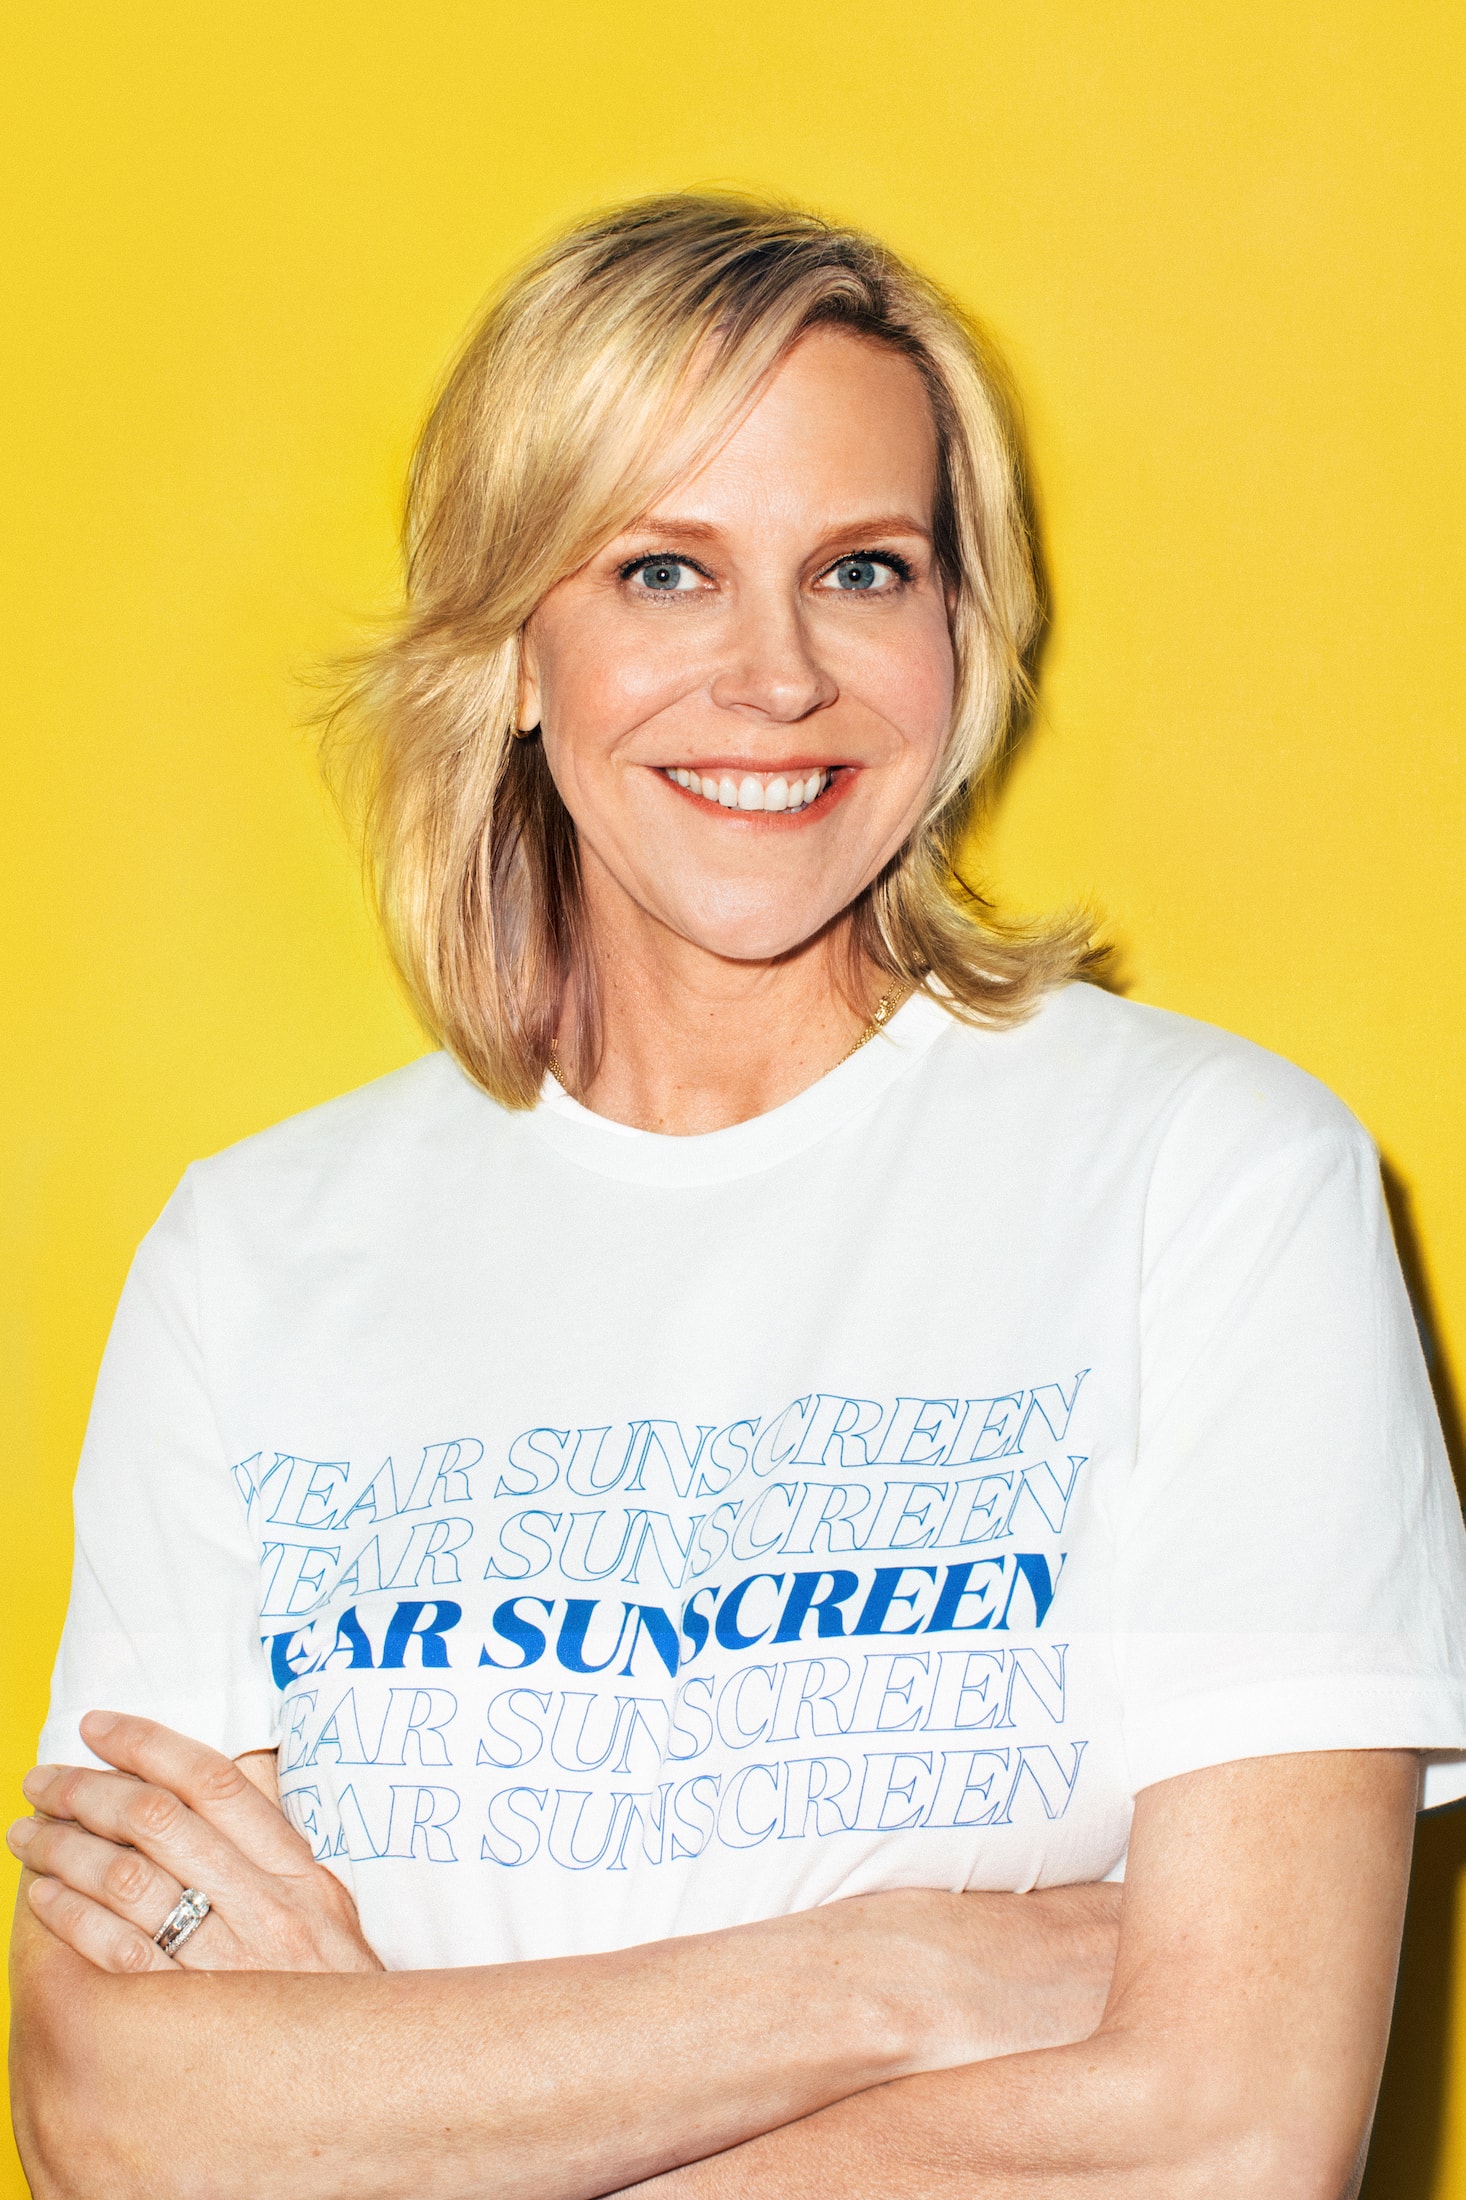 Supergoop! Founder Holly Thaggard Interview Sunscreen Glow Screen Product Launch SPF Skincare